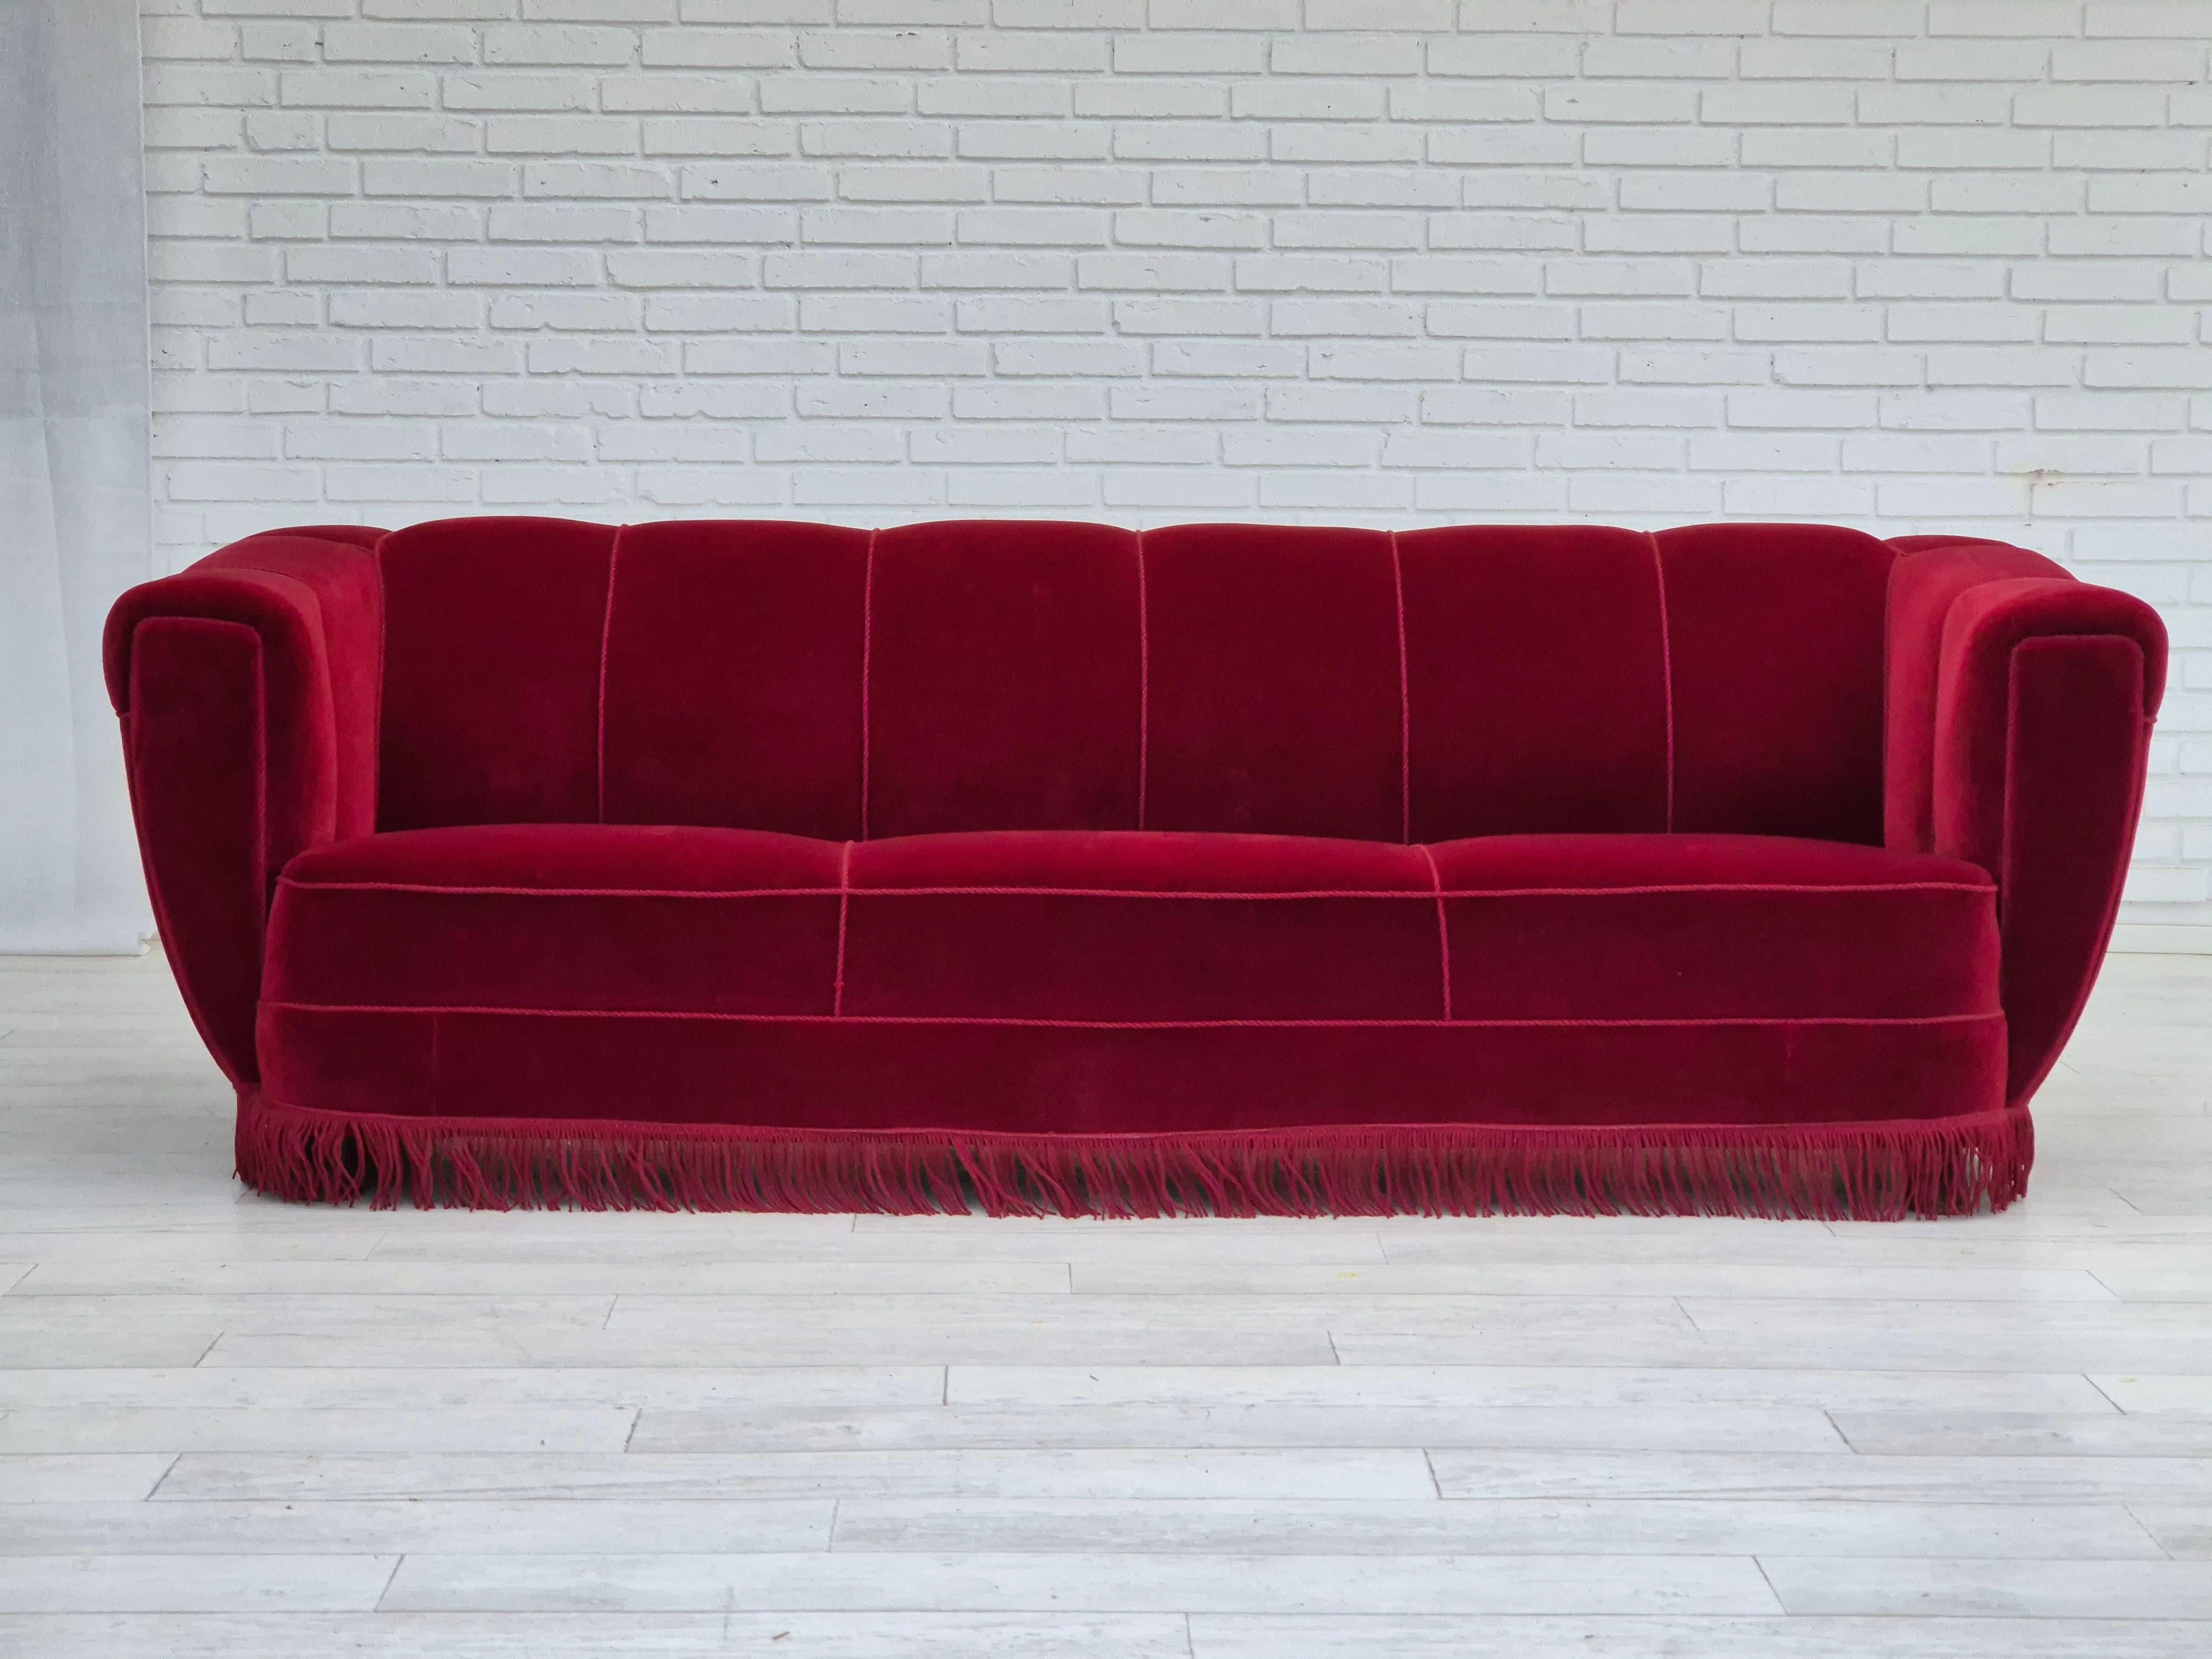 1960s, Danish 3 seater sofa in original very good condition: no smells and no stains. Cherry-red furniture velour, oak wood legs. Springs in the seat. Manufactured by Danish furniture manufacturer in about 1960s.